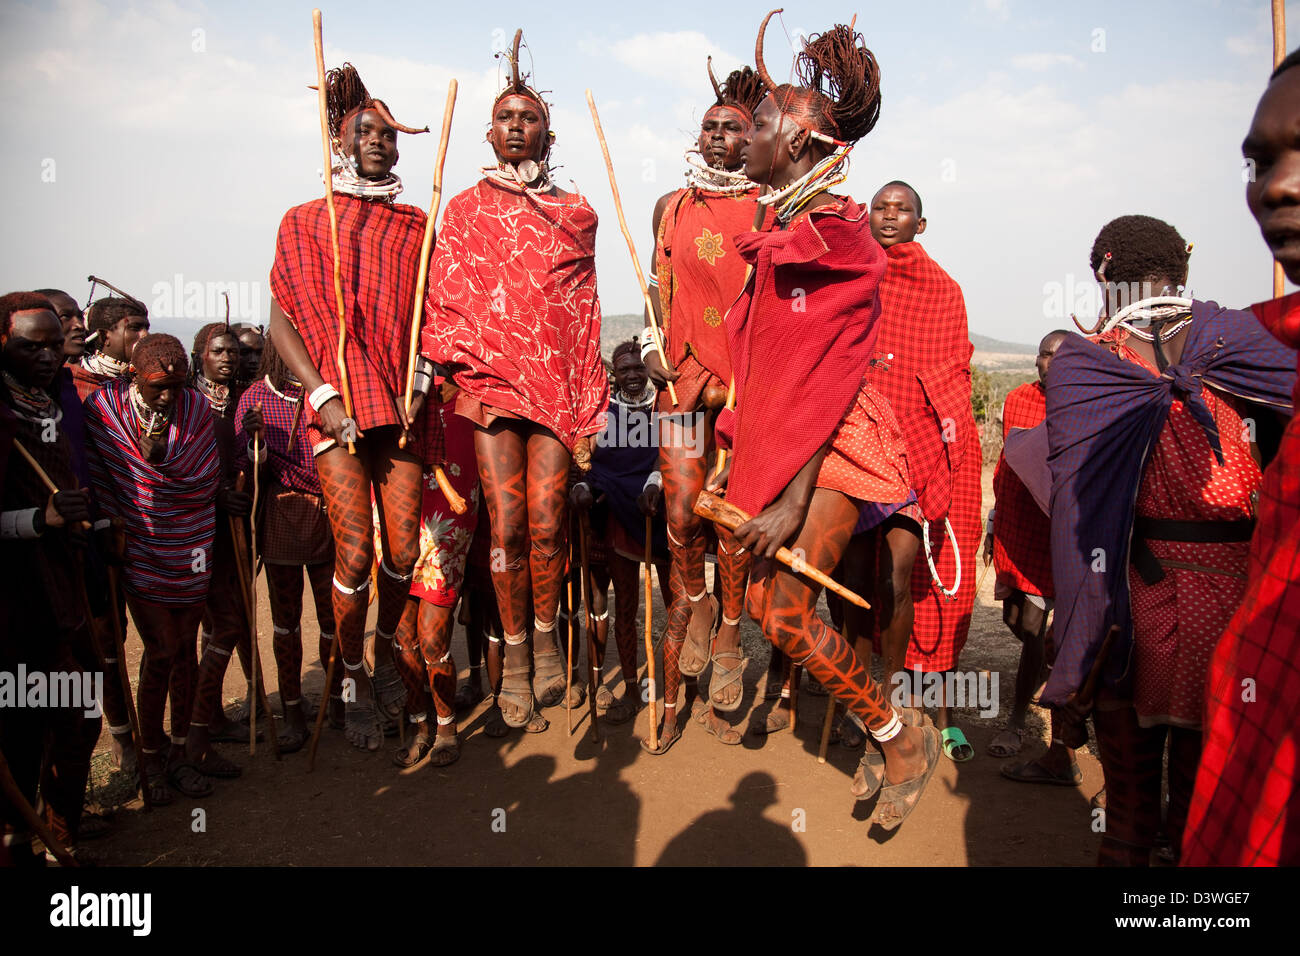 Young men called Morans are competing in jumping as high and straight as possible, a competitive dance called adumu, at a party. Stock Photo